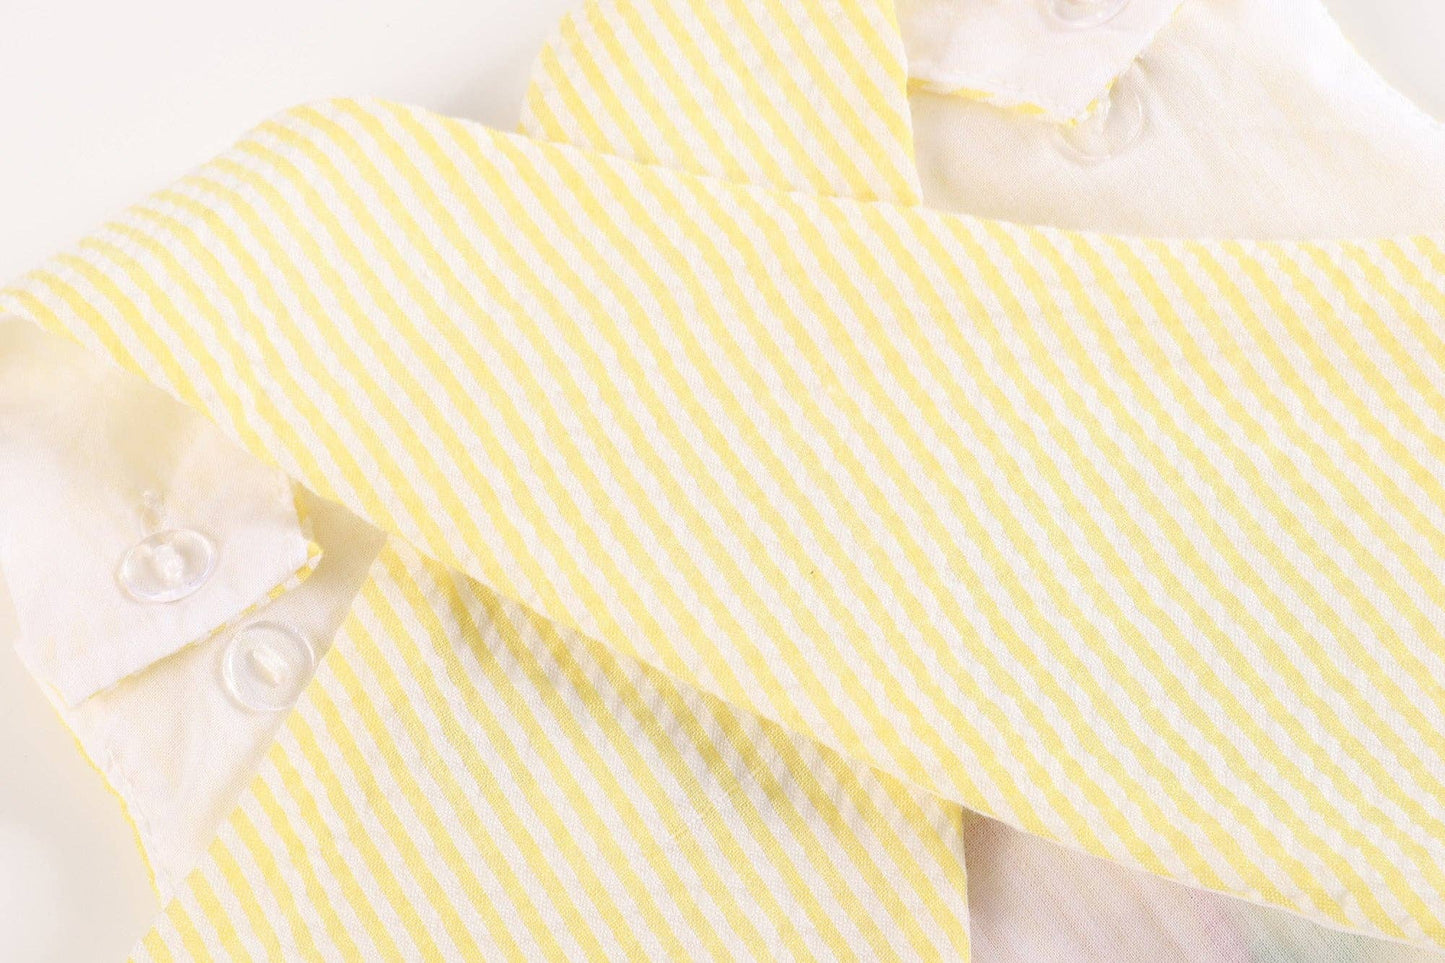 An adorable Yellow Seersucker Turtle 2pc Baby Bloomer Set: 12-18M by Lil Cactus, featuring a yellow and white striped bow tie on a soft cotton white surface.